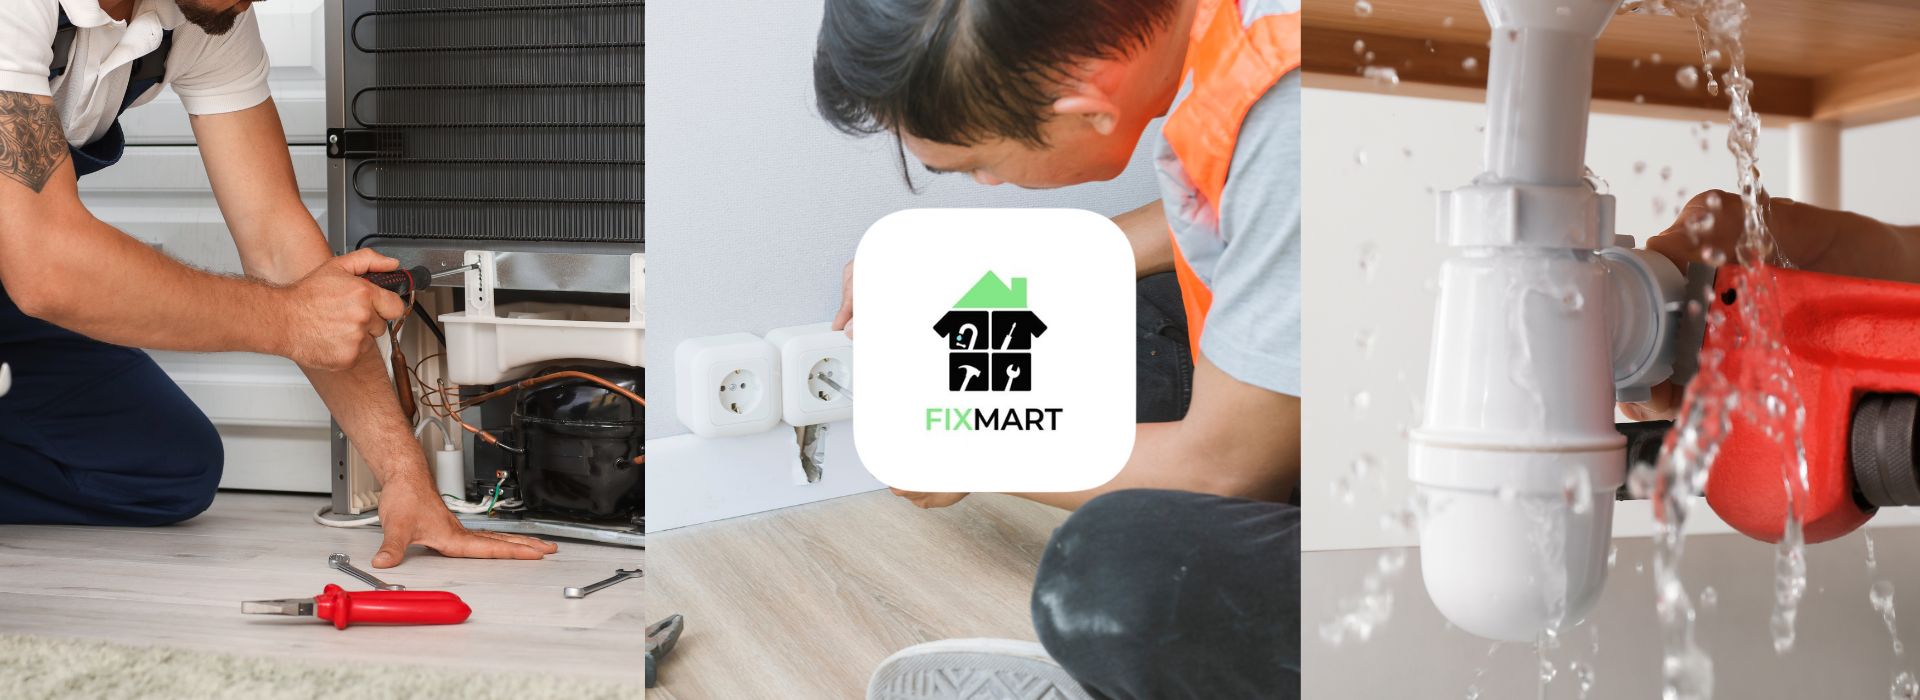 FixMart’s Simplified Guide to Caregiver and Babysitting Services